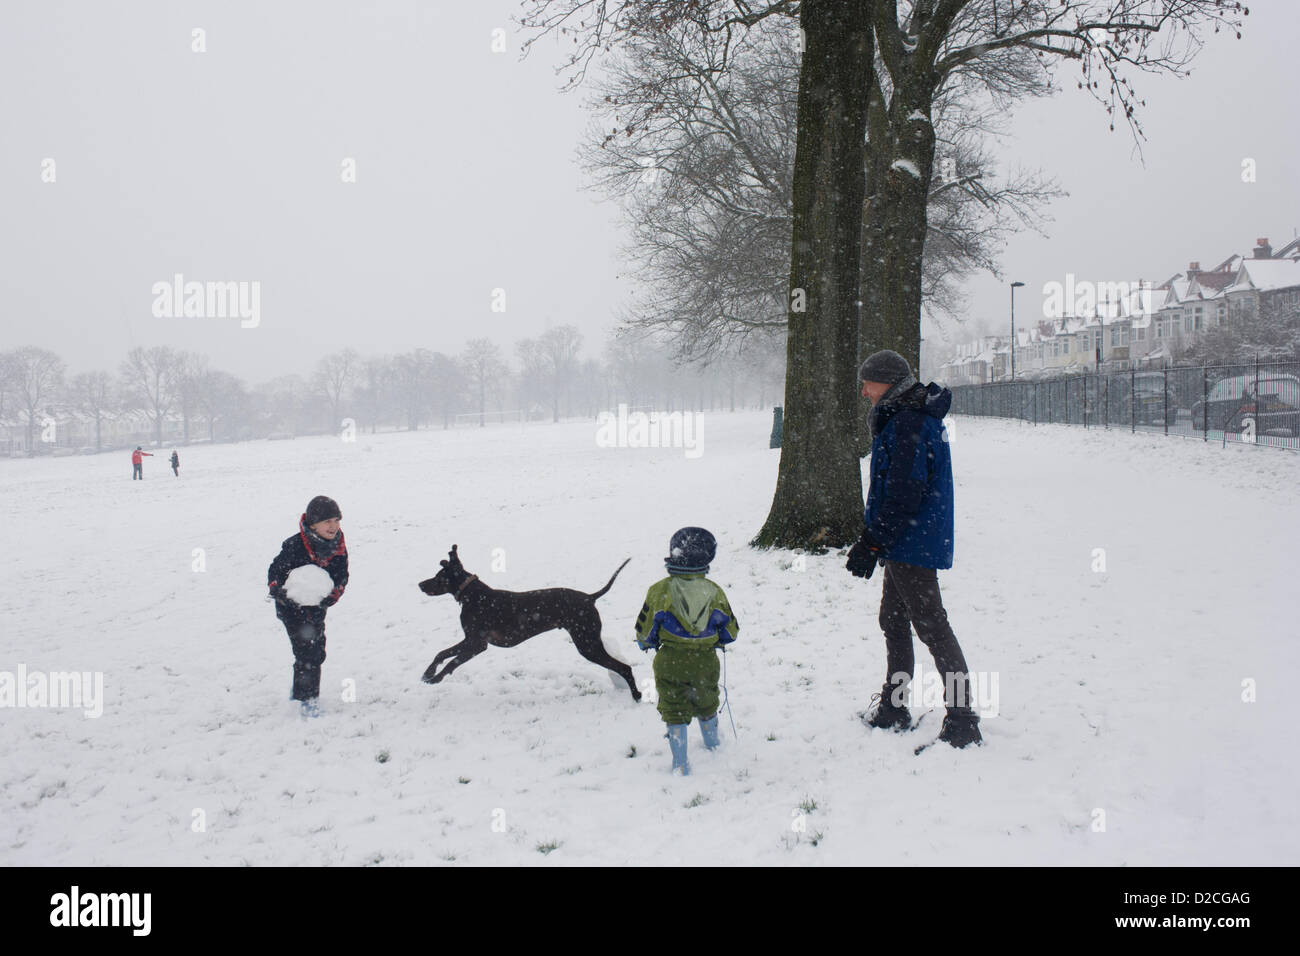 A family out in the snow enjoy a winter's day with their pet dog in a snowbound south London park. During a prolonged cold spell of bad weather, snow fell continuously on the capital on Sunday, allowing families the chance to enjoy the bleak conditions, here in Ruskin Park in the borough of Lambeth, London England. The family pet dog jumps and leaps in the soft snow that is still falling while the kids are throwing a large snowball to each other - trying not to splatter themselves as they each catch the snowy sphere. Edwardian period homes can be seen in the background  beneath 100 year-old as Stock Photo